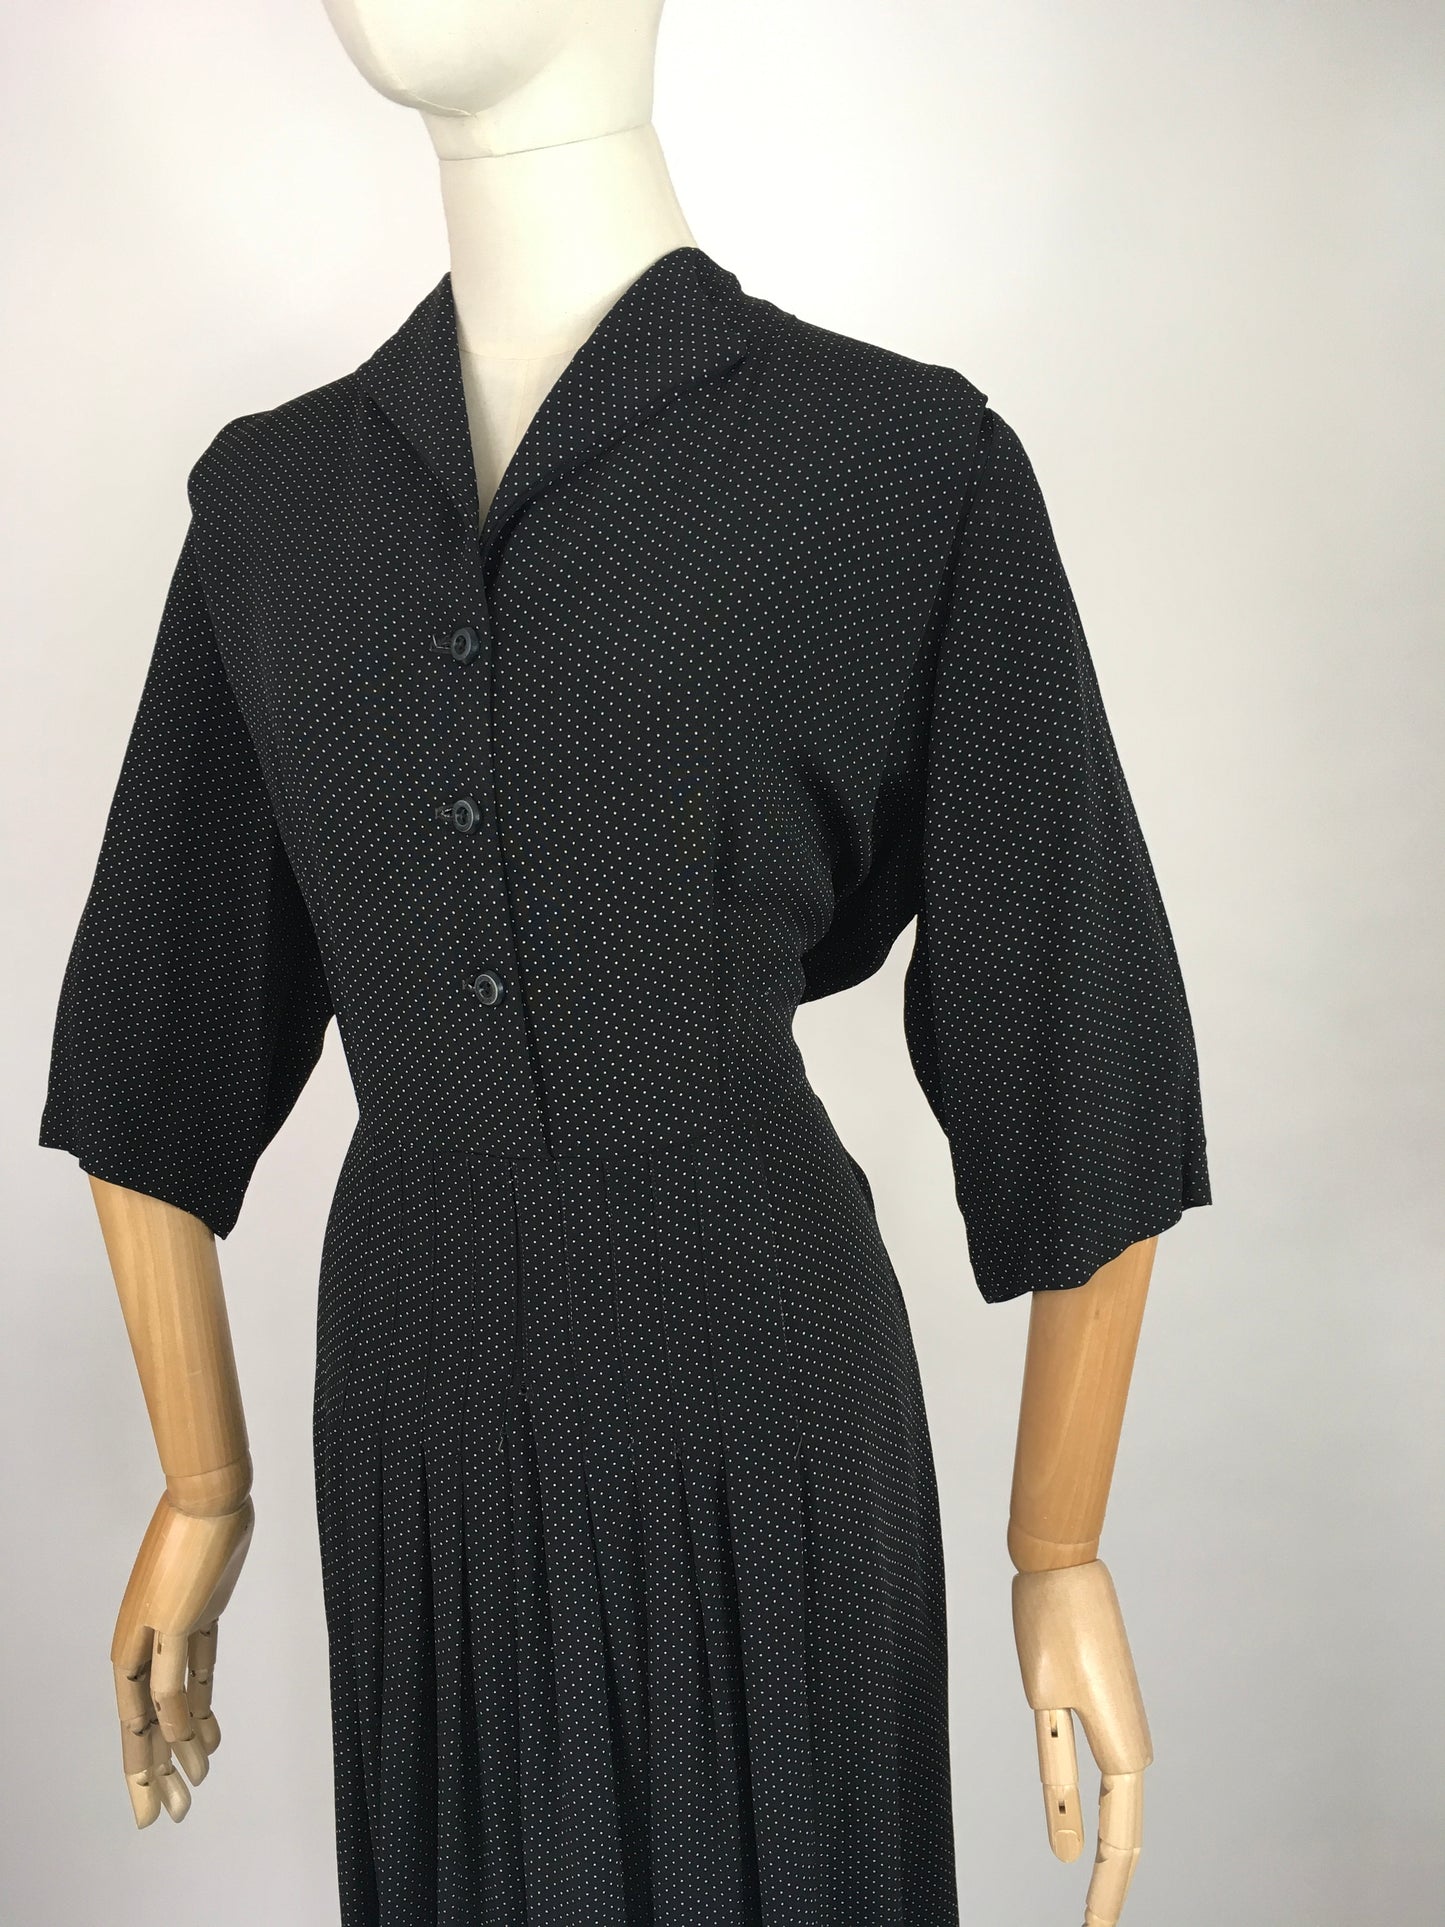 Original 1940’s VOLUP Day Dress - In a Beautifully Classic Black and White Polka Dot Cotton